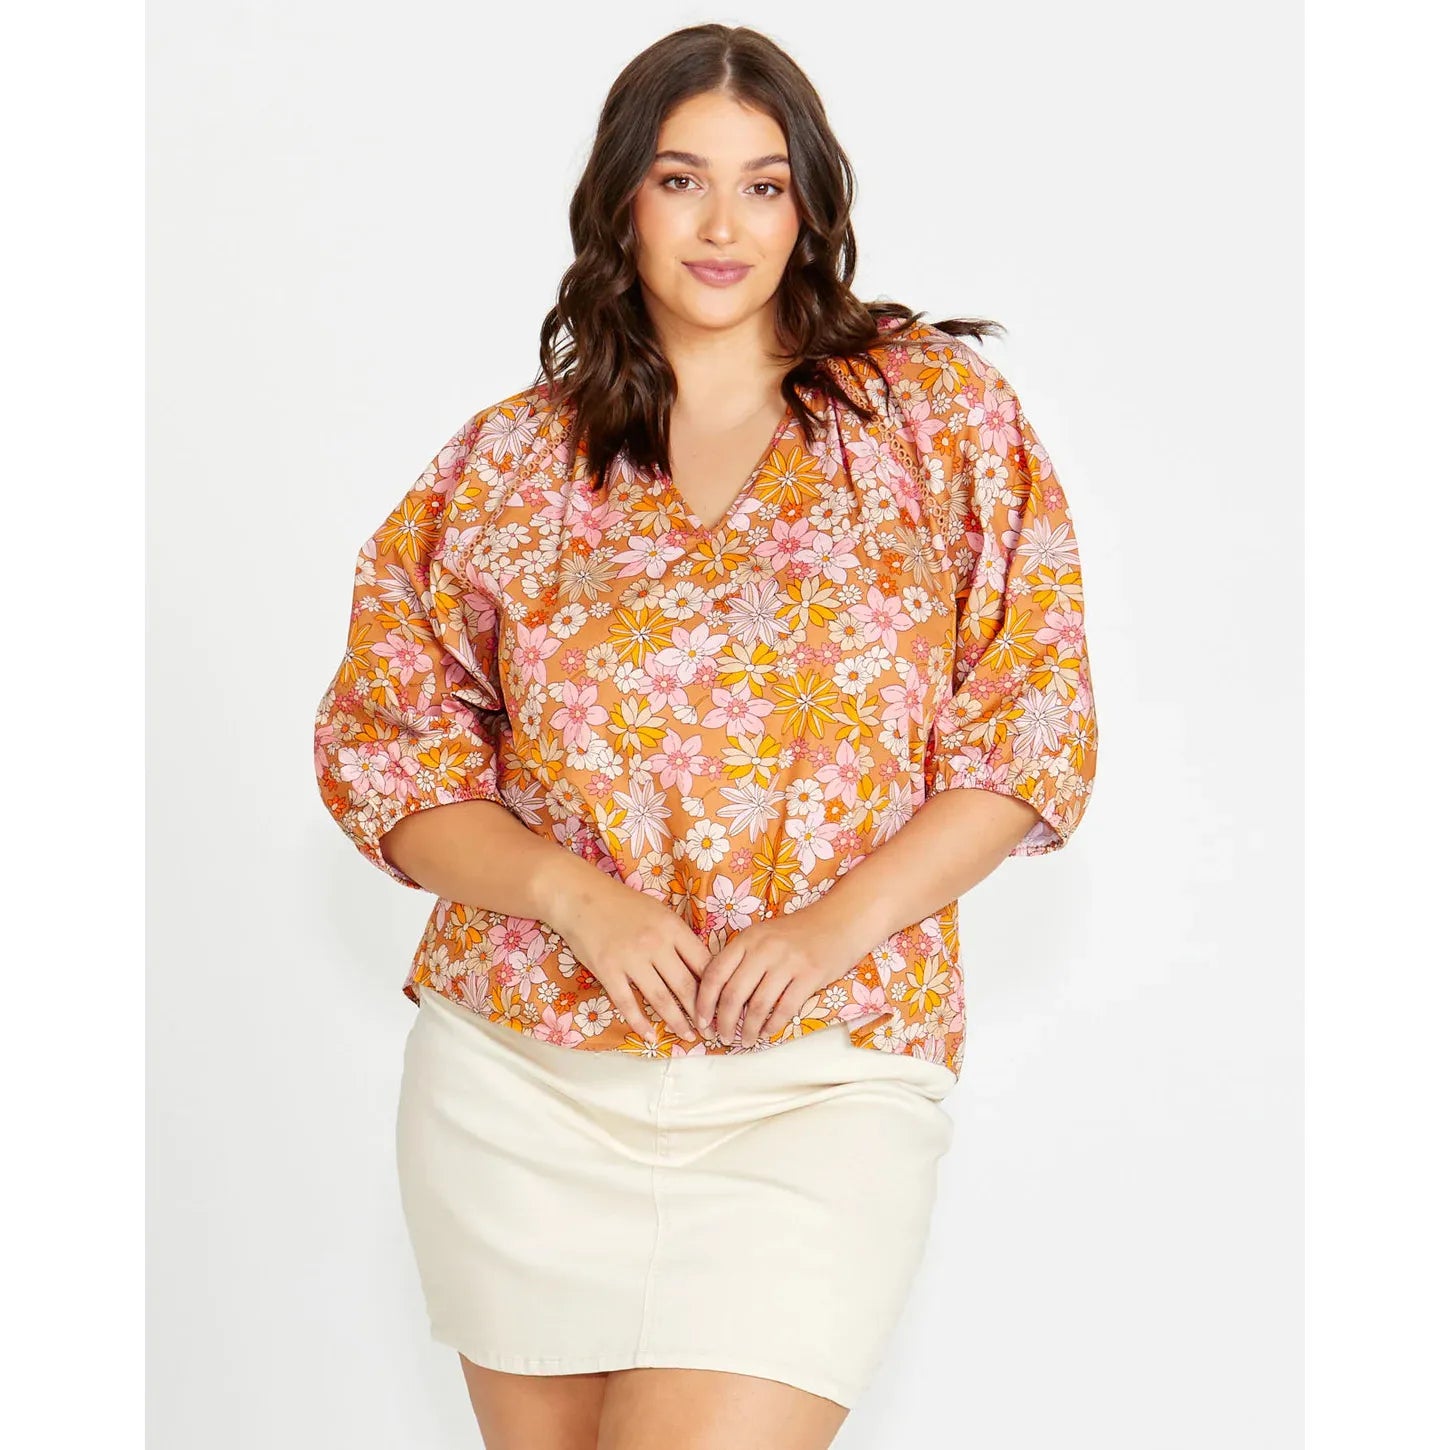 Eleanor Shell Top - 70s Floral